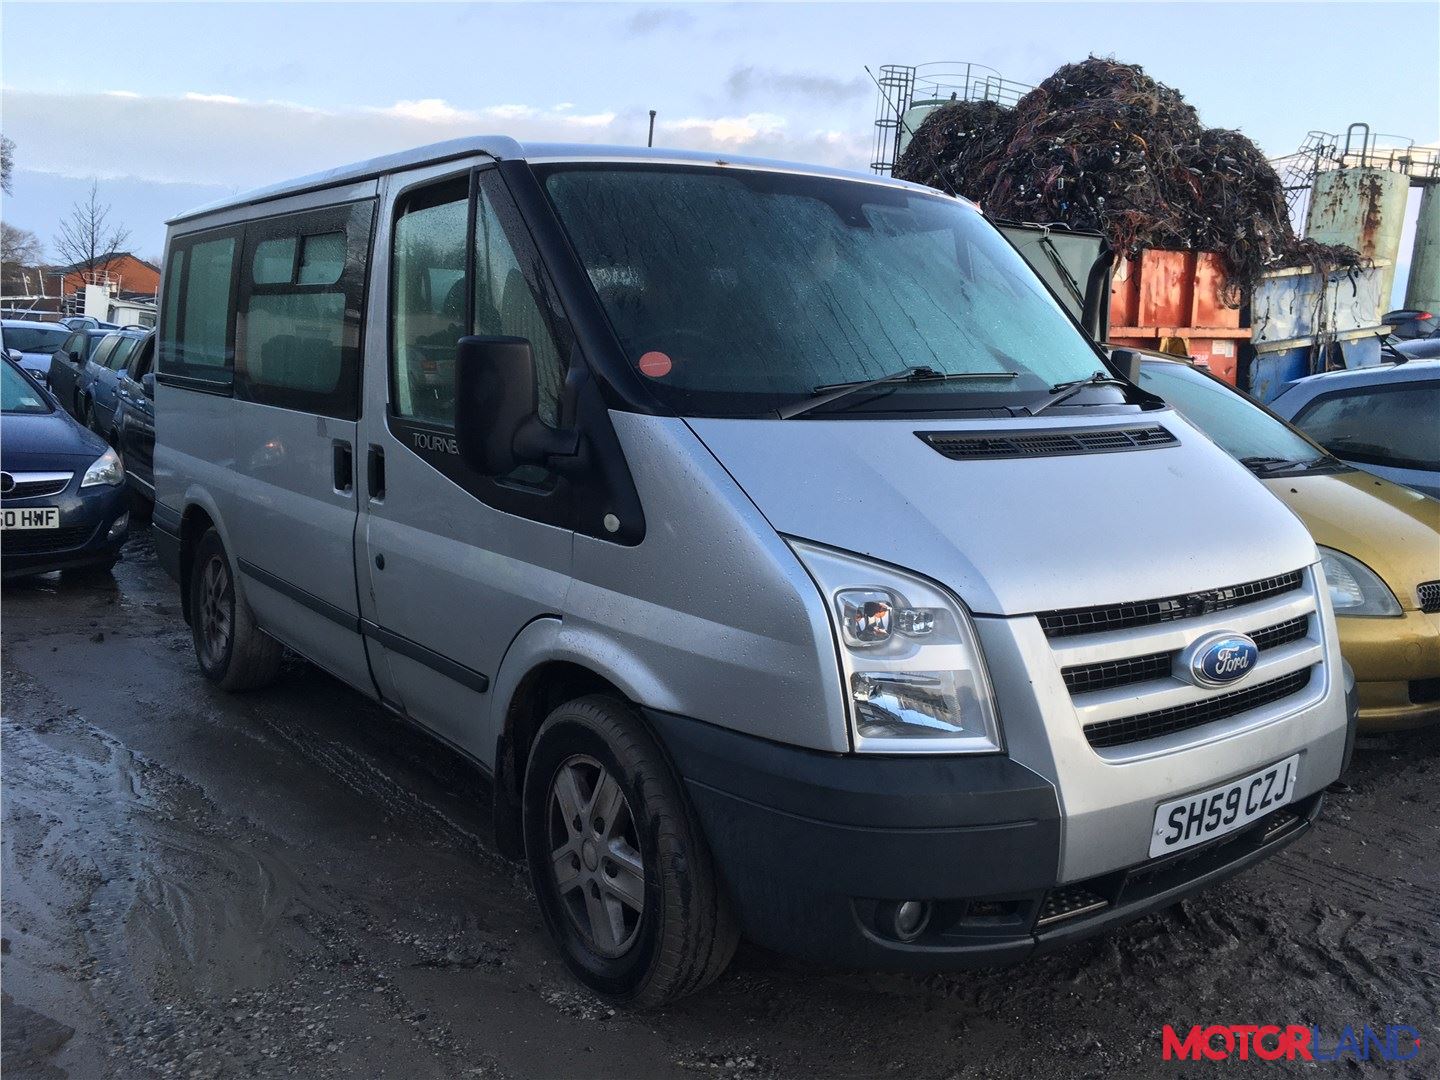 Форд транзит 2006 2014. Ford Transit 2006. Ford Transit 2006 214. Transit 2006-2014. Ford Transit 2006 Front.